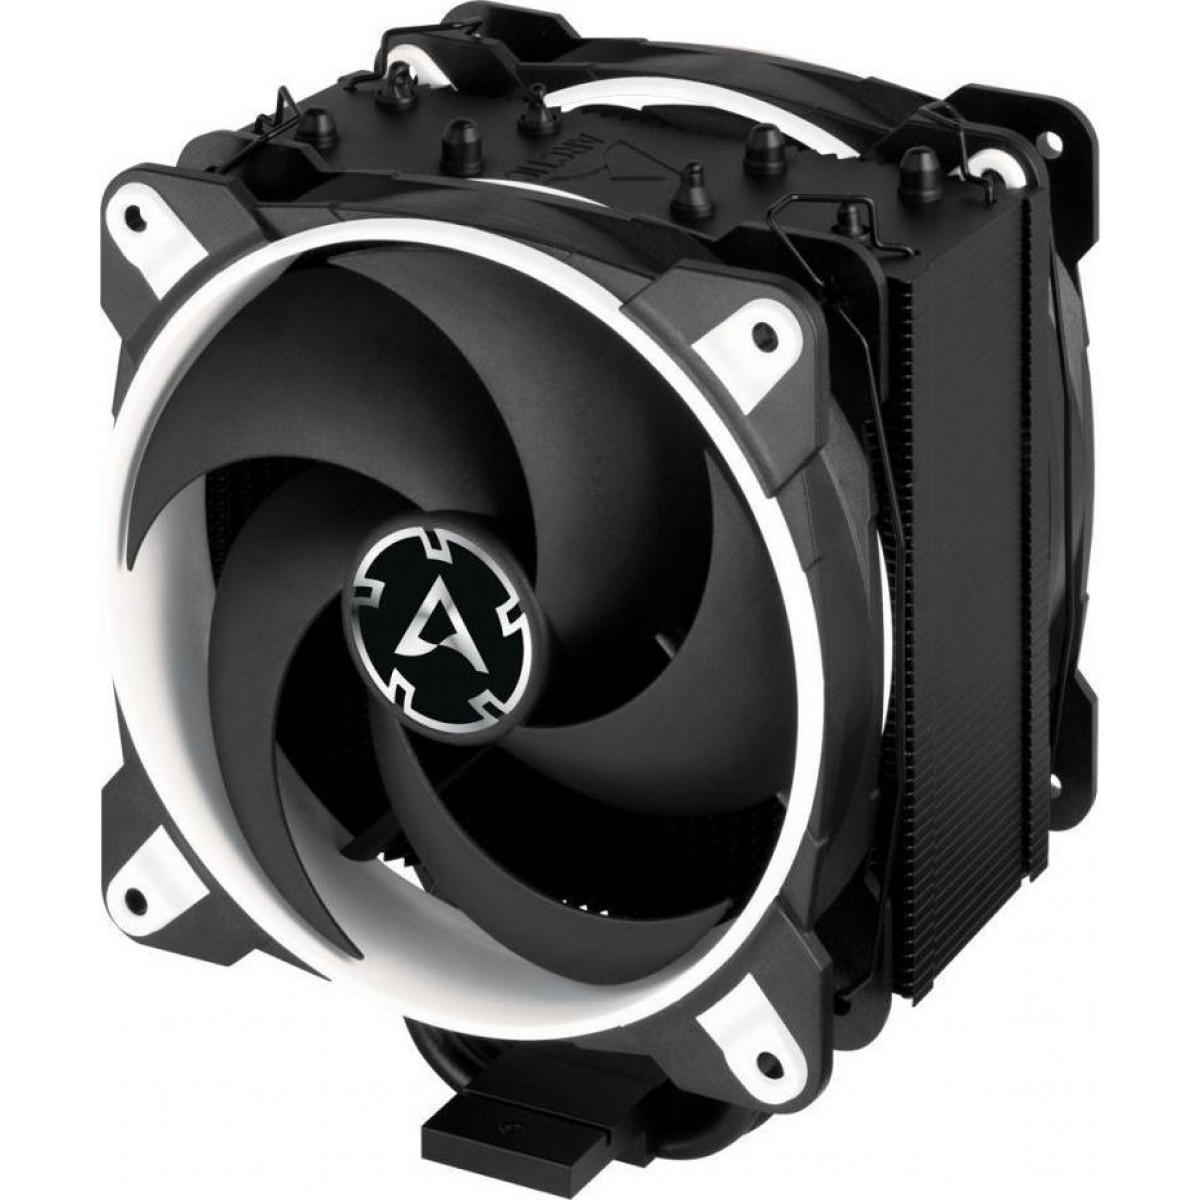 COOLER ARCTIC FREEZER 34 eSPORTS DUO WHITE ACFRE00061A